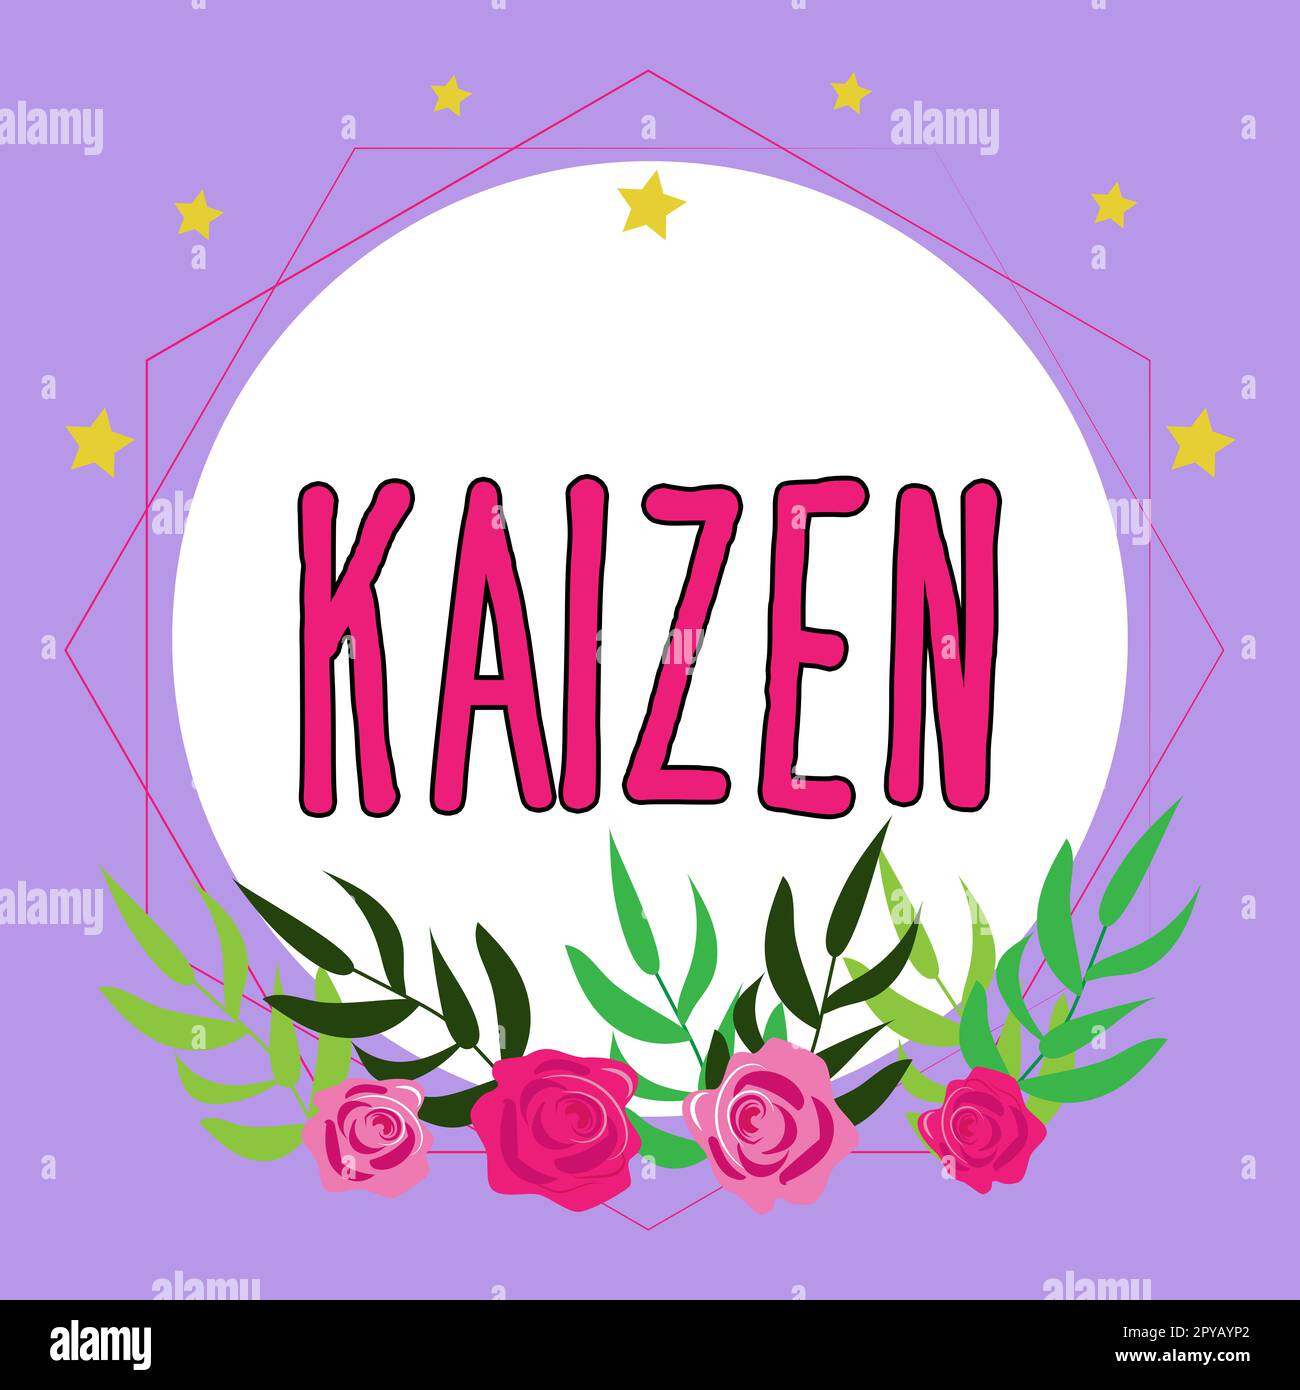 Inspiration showing sign Kaizen. Business concept a Japanese business philosophy of improvement of working practices Stock Photo